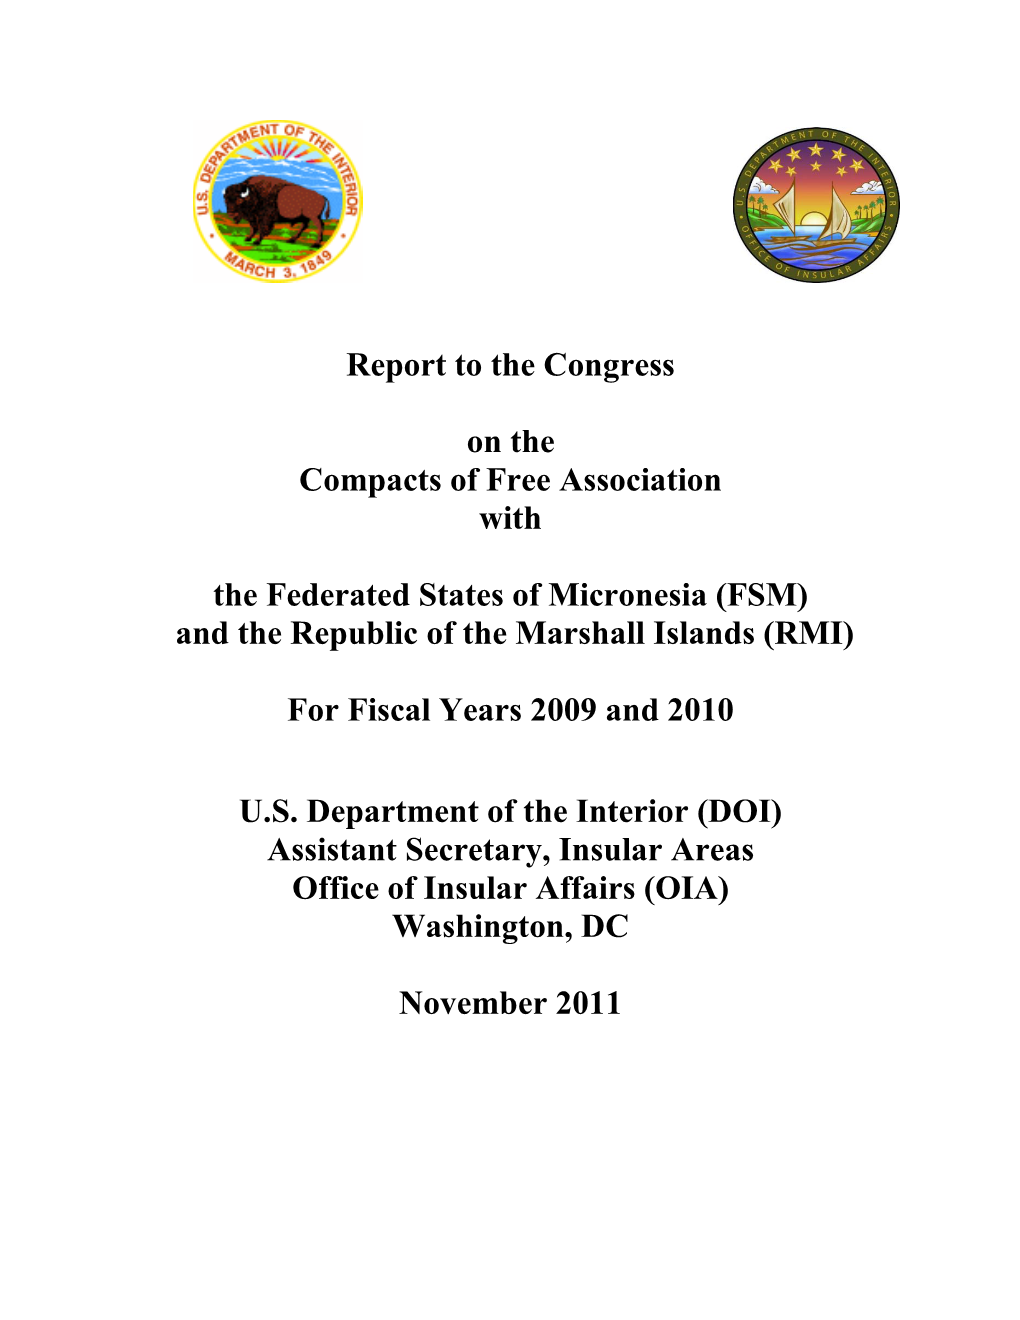 Report to the Congress on the Compacts of Free Association With